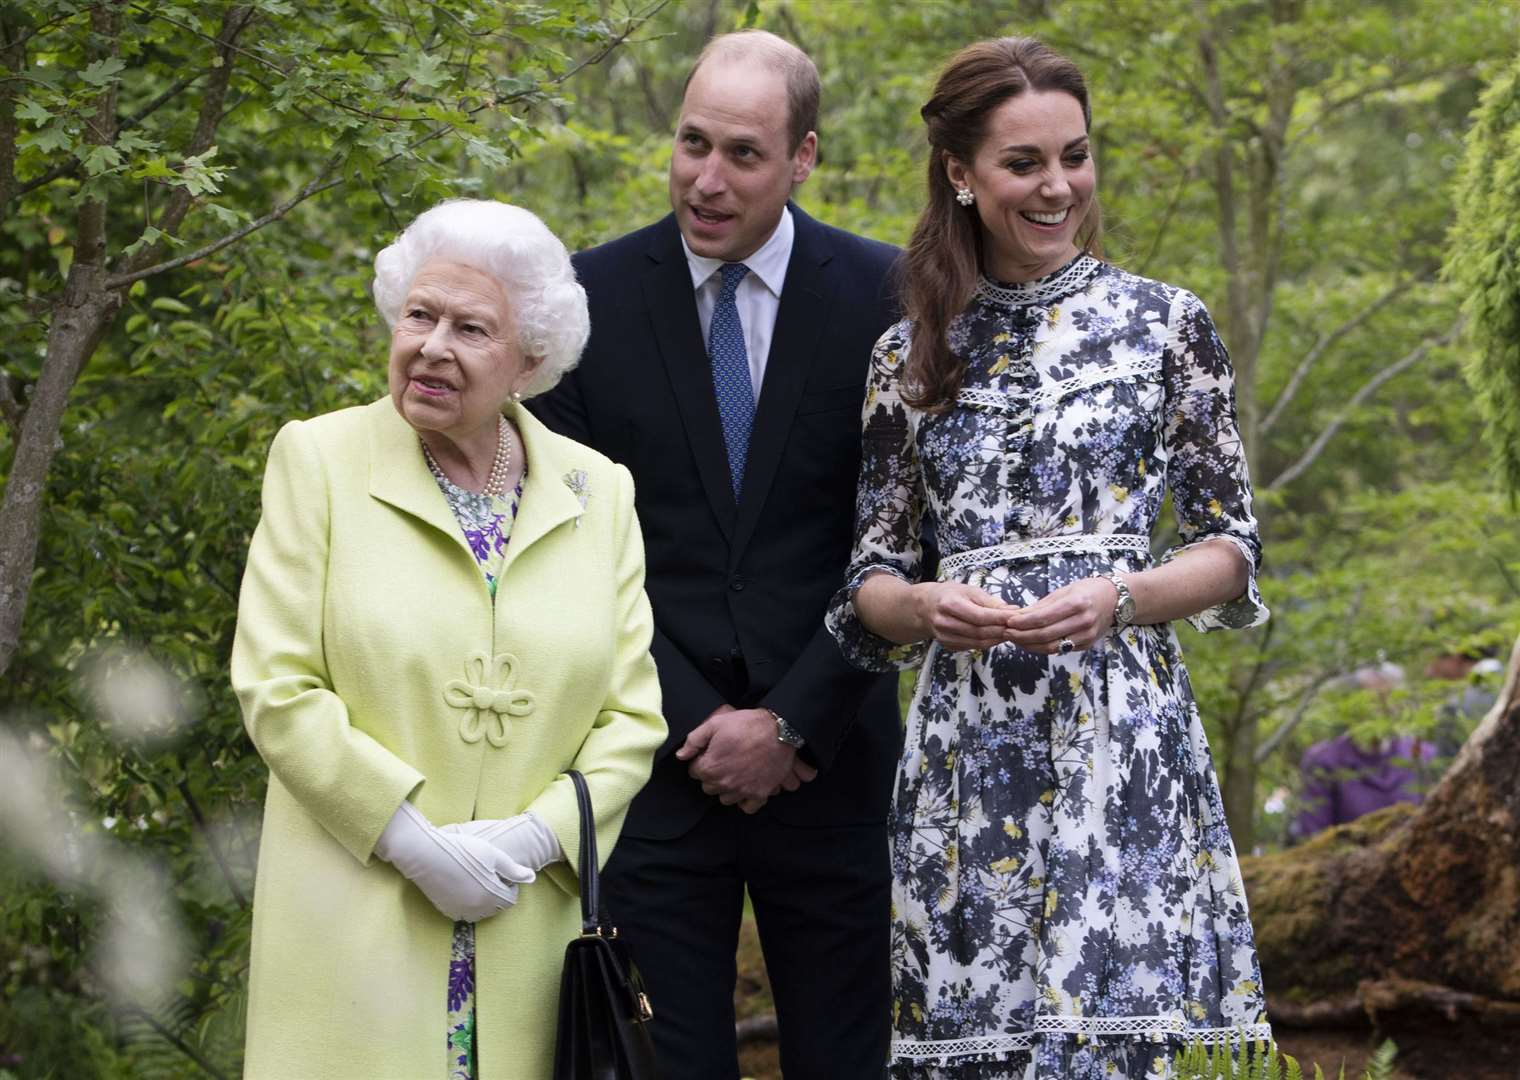 Queen Elizabeth II and the Duke and Duchess of Cambridge during their visit to the RHS Chelsea Flower Show. Picture: Geoff Pugh/PA Wire